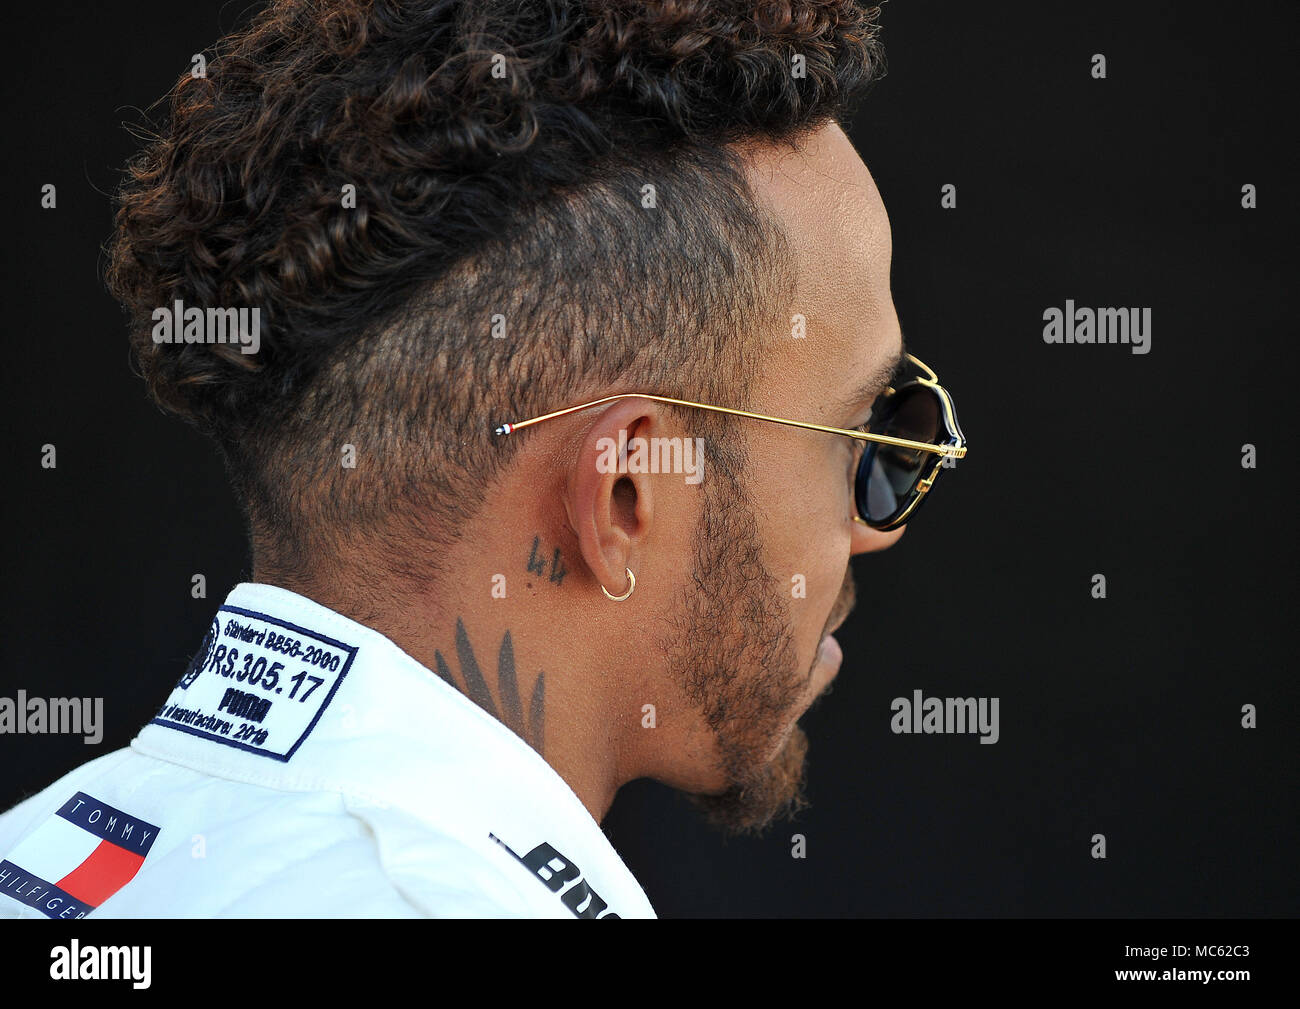 Lewis Hamilton of Mercedes AMG Petronas Motorsport. Day of the 2018 Formula 1 Rolex Australian Grand Prix held at circuit of Albert Park, Melbourne, Victoria on the 22nd March 2018.